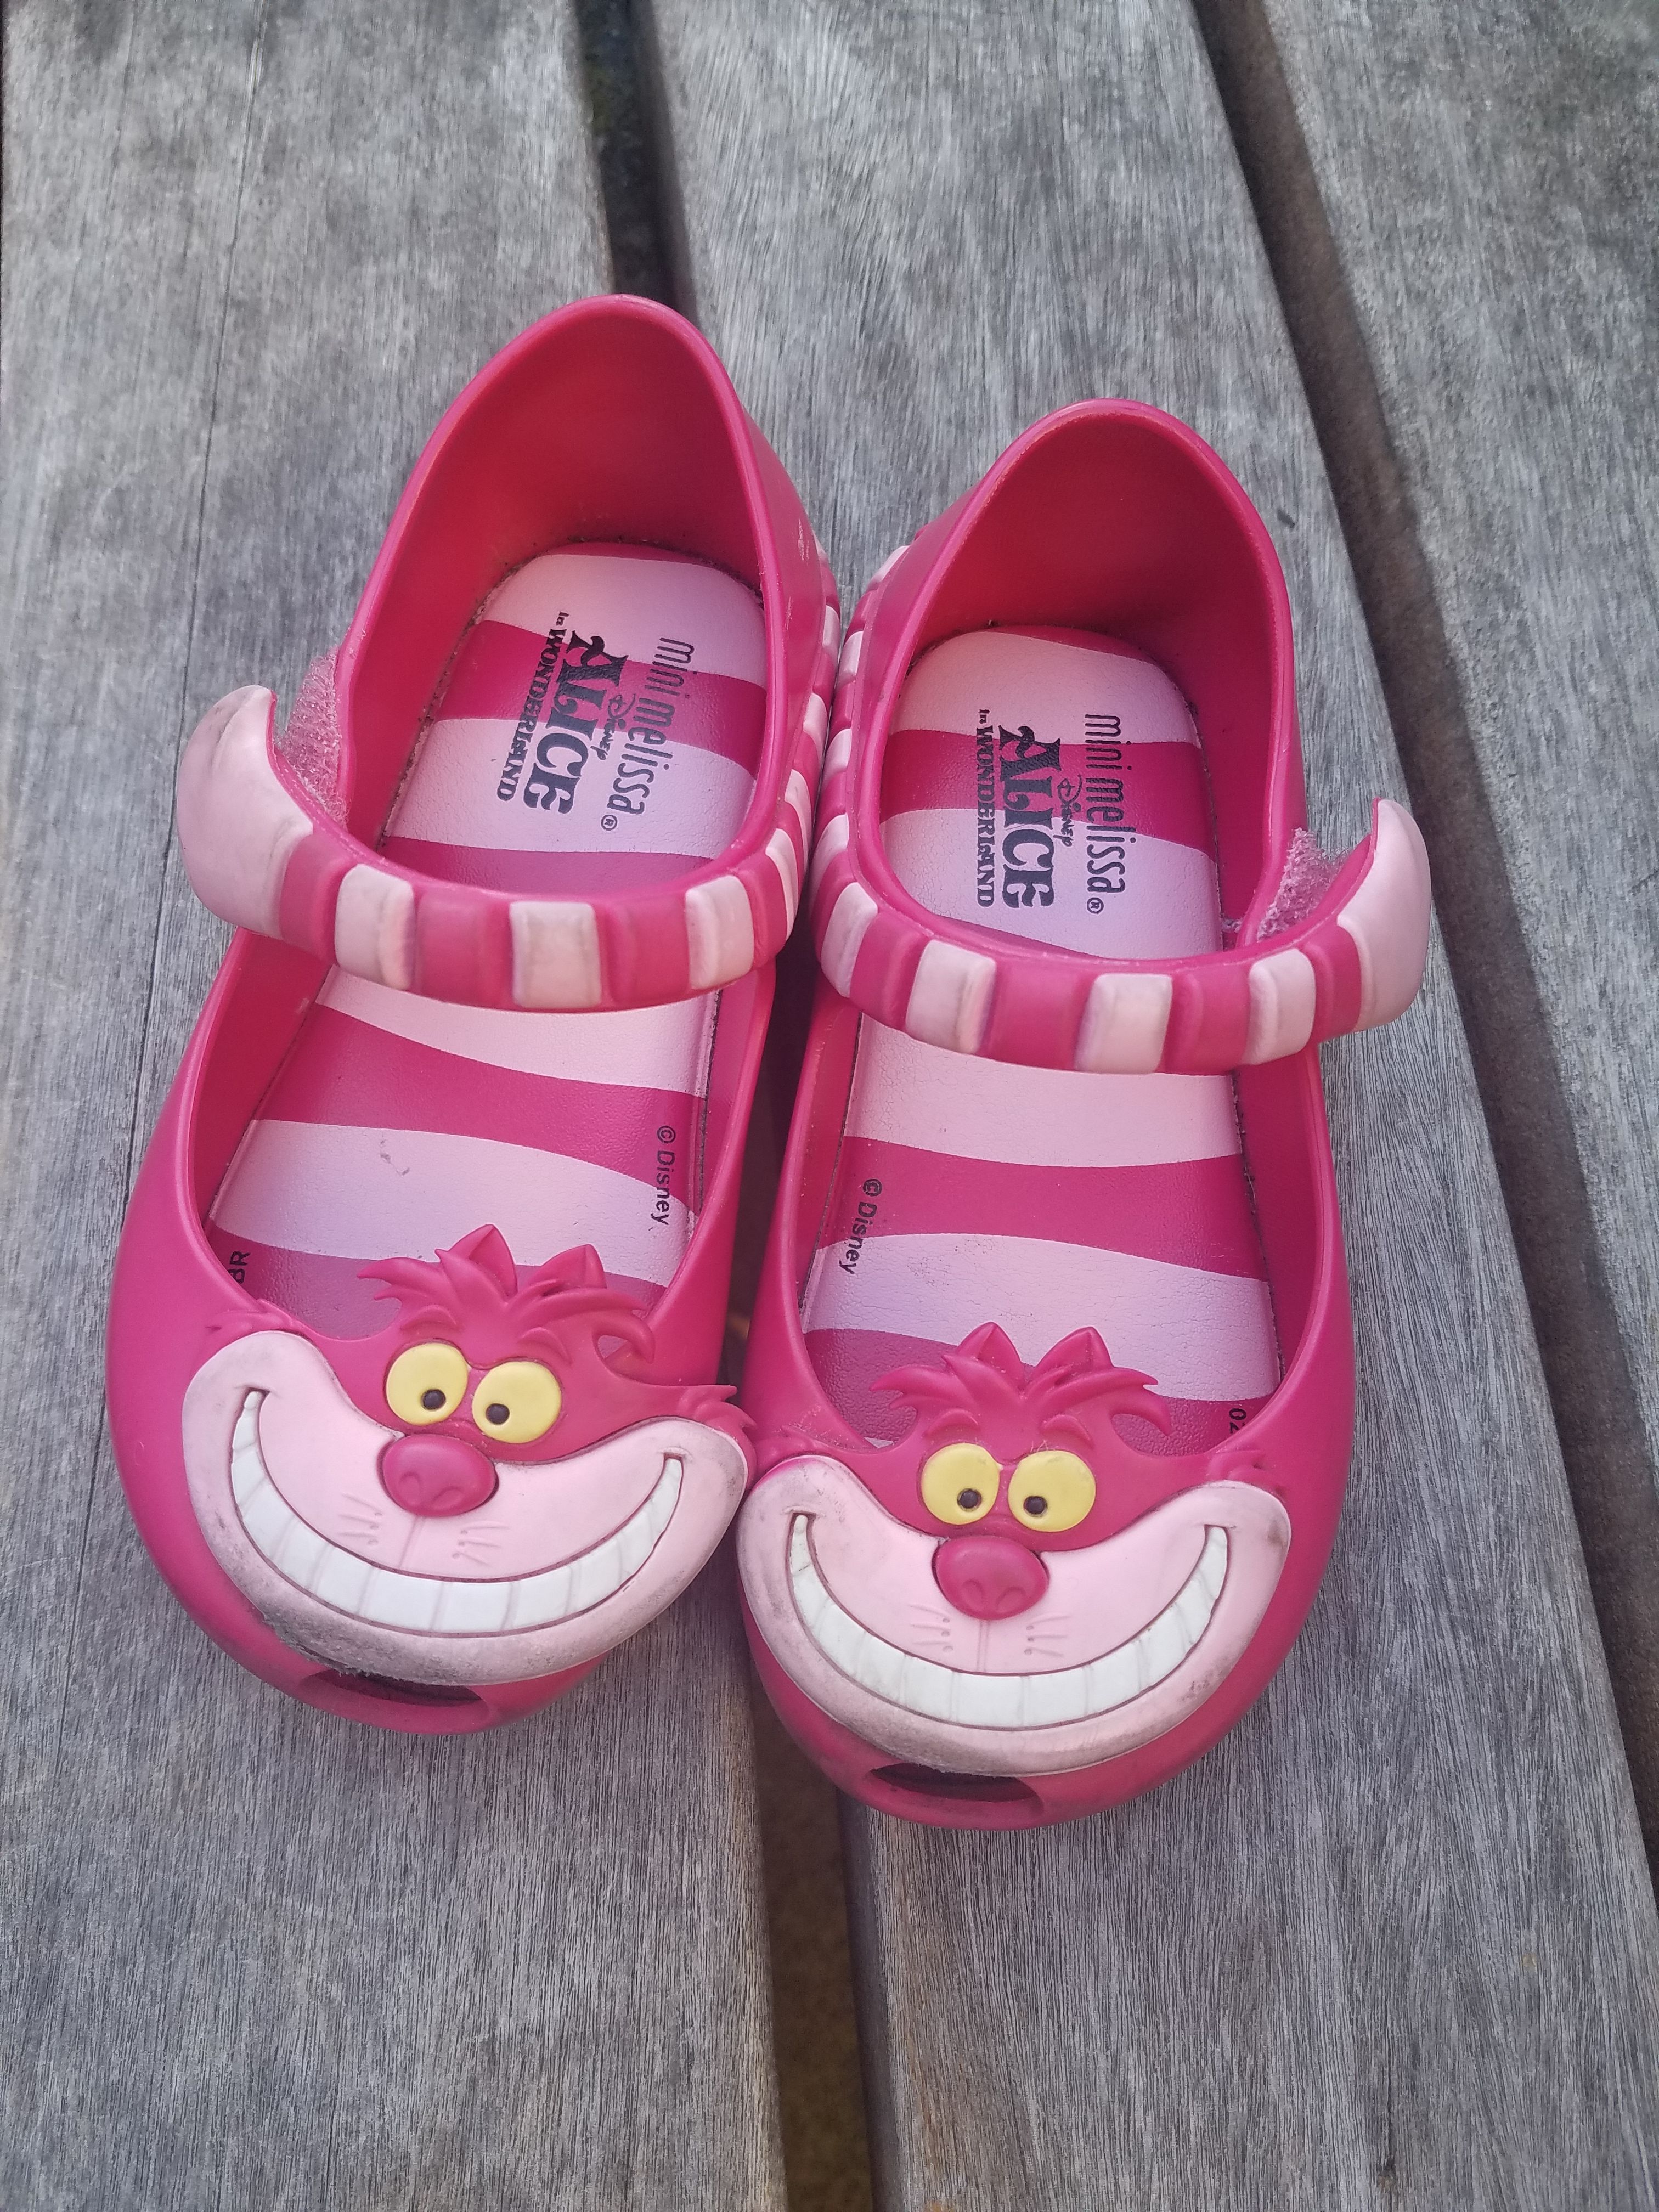 Girls shoes size 7 toddler Alice in Wonderland Cheshire cat pink toddler